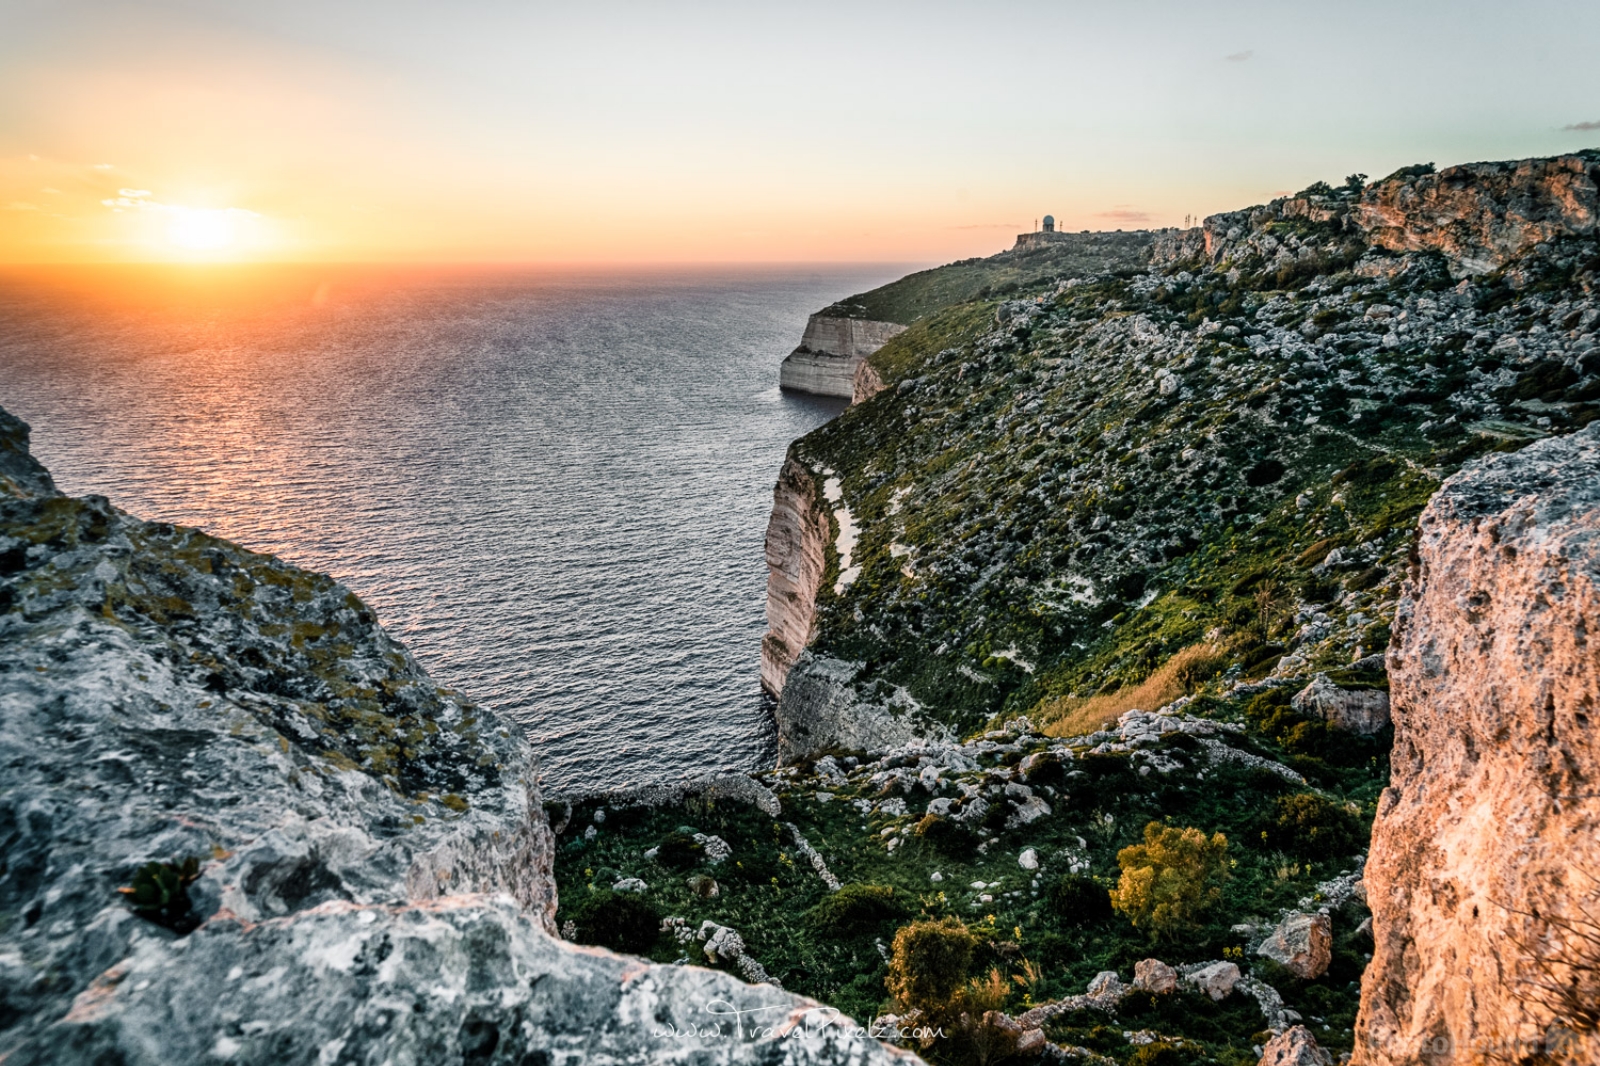 Image of Dingli Cliffs View Point by Fabian Pfitzinger